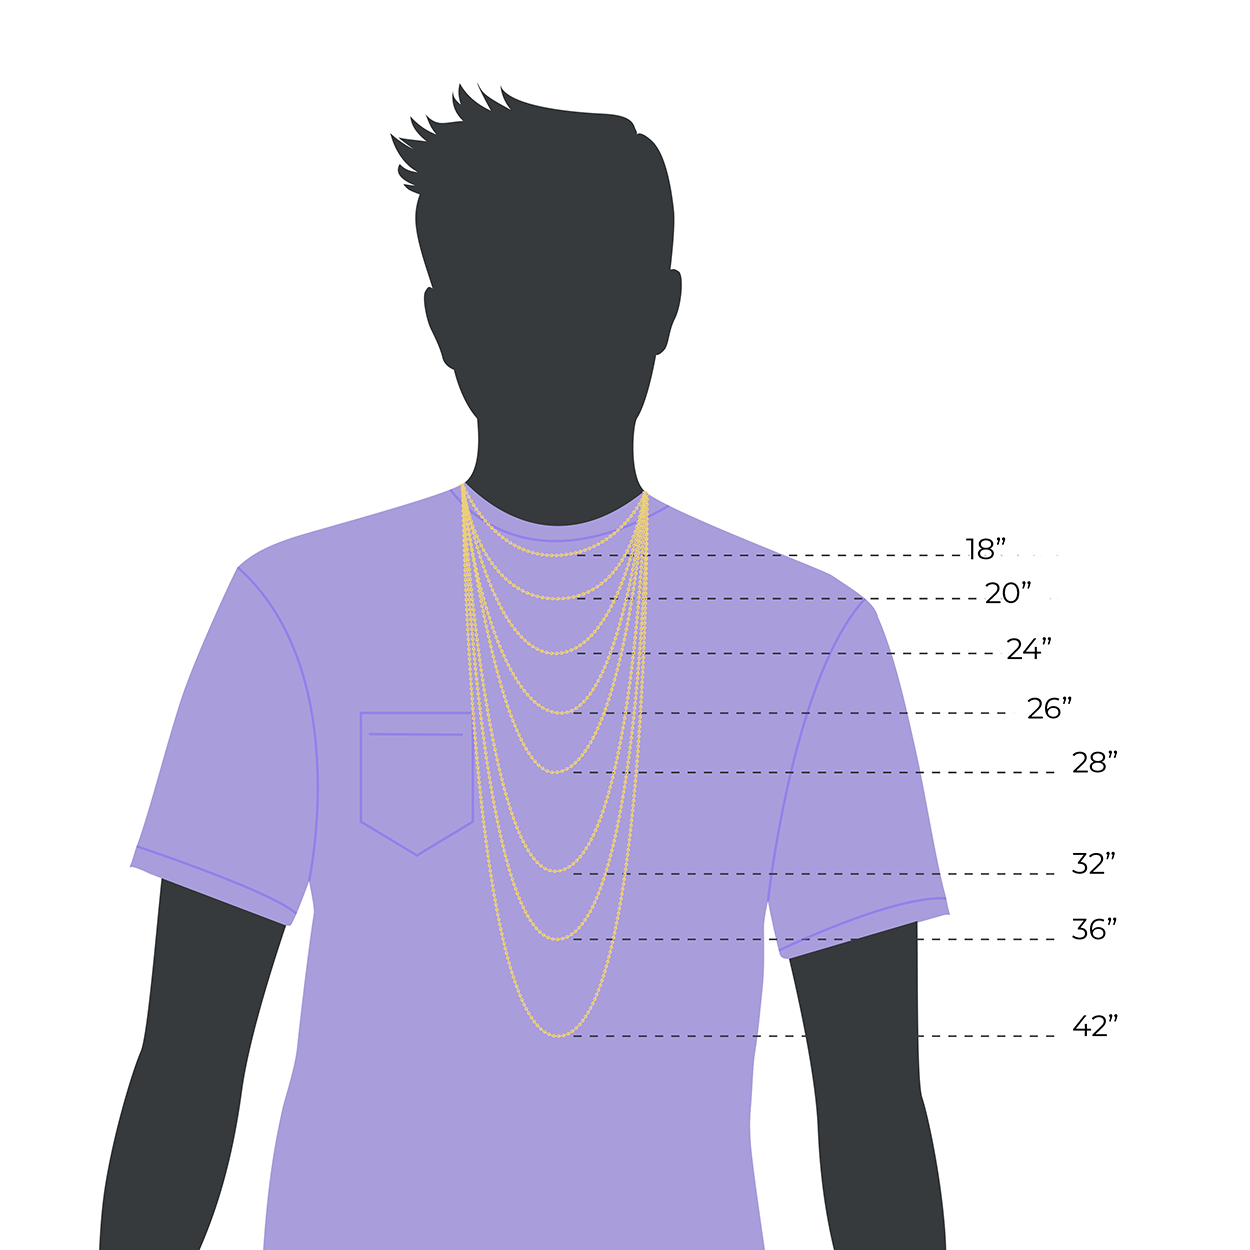 Chain Length Guide on Male Silhouette